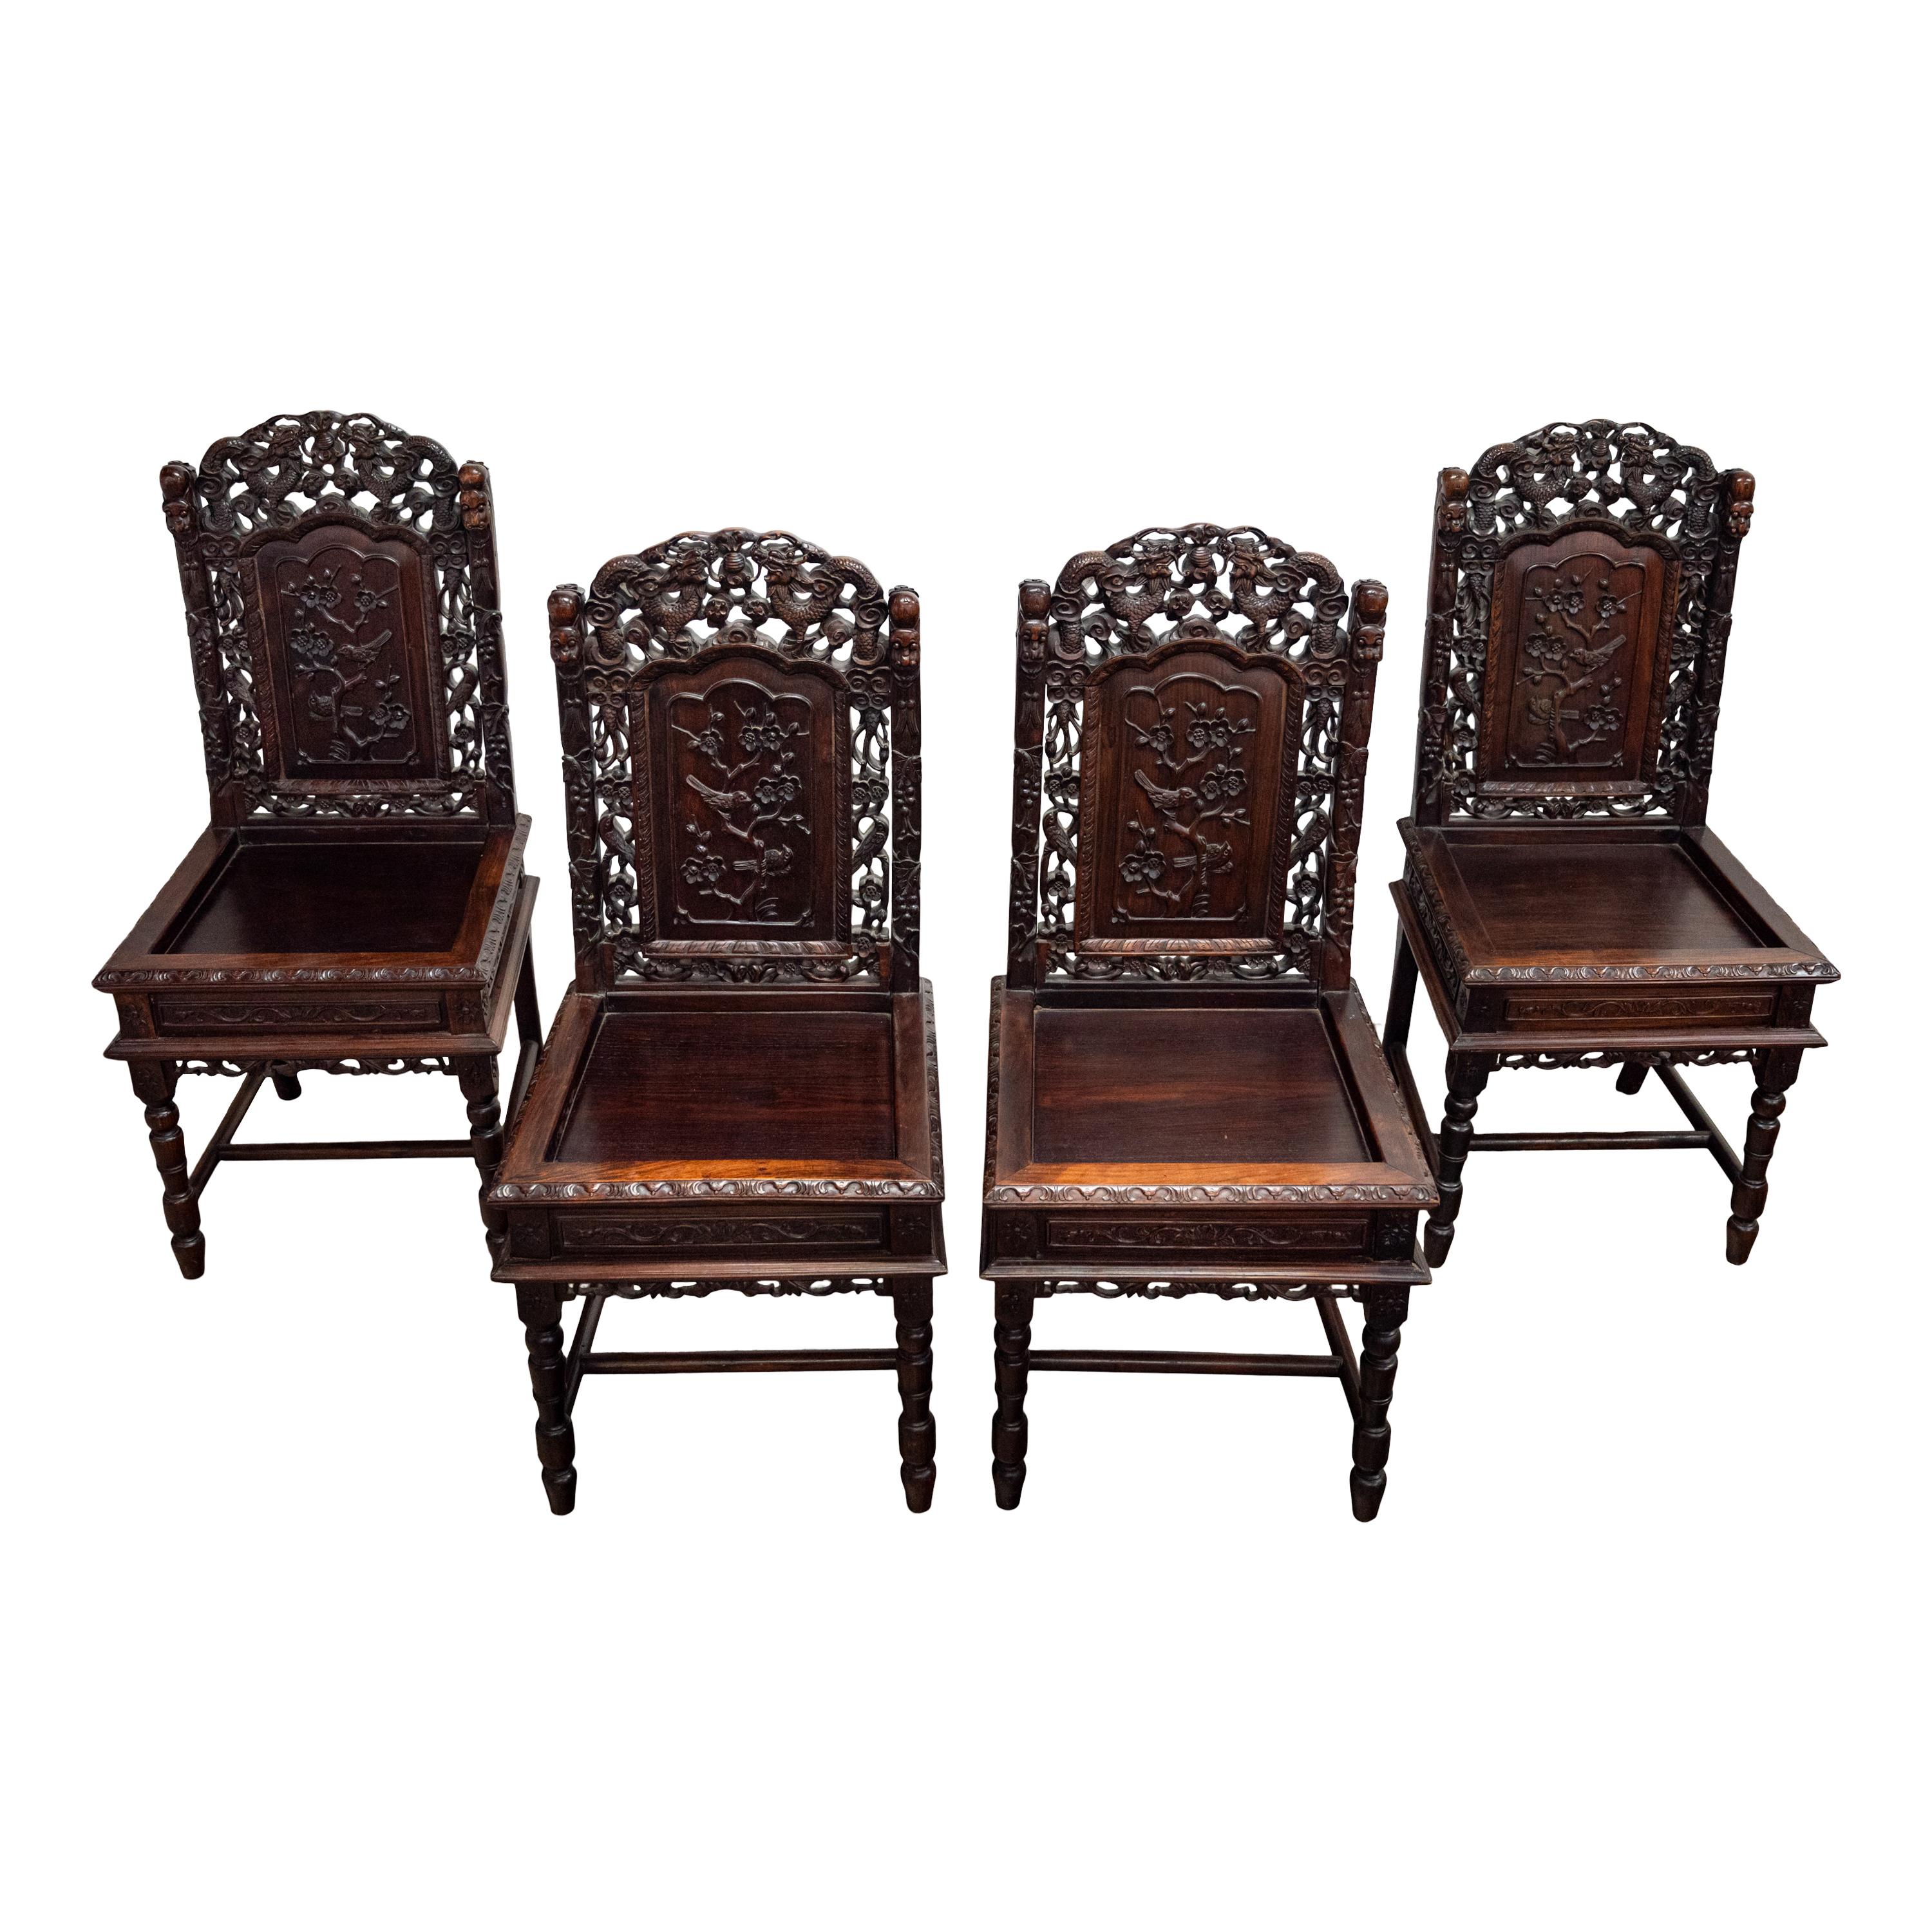 Four Antique Qing Dynasty Chinese Carved Rosewood Side Dining Dragon Chairs 1880 For Sale 7